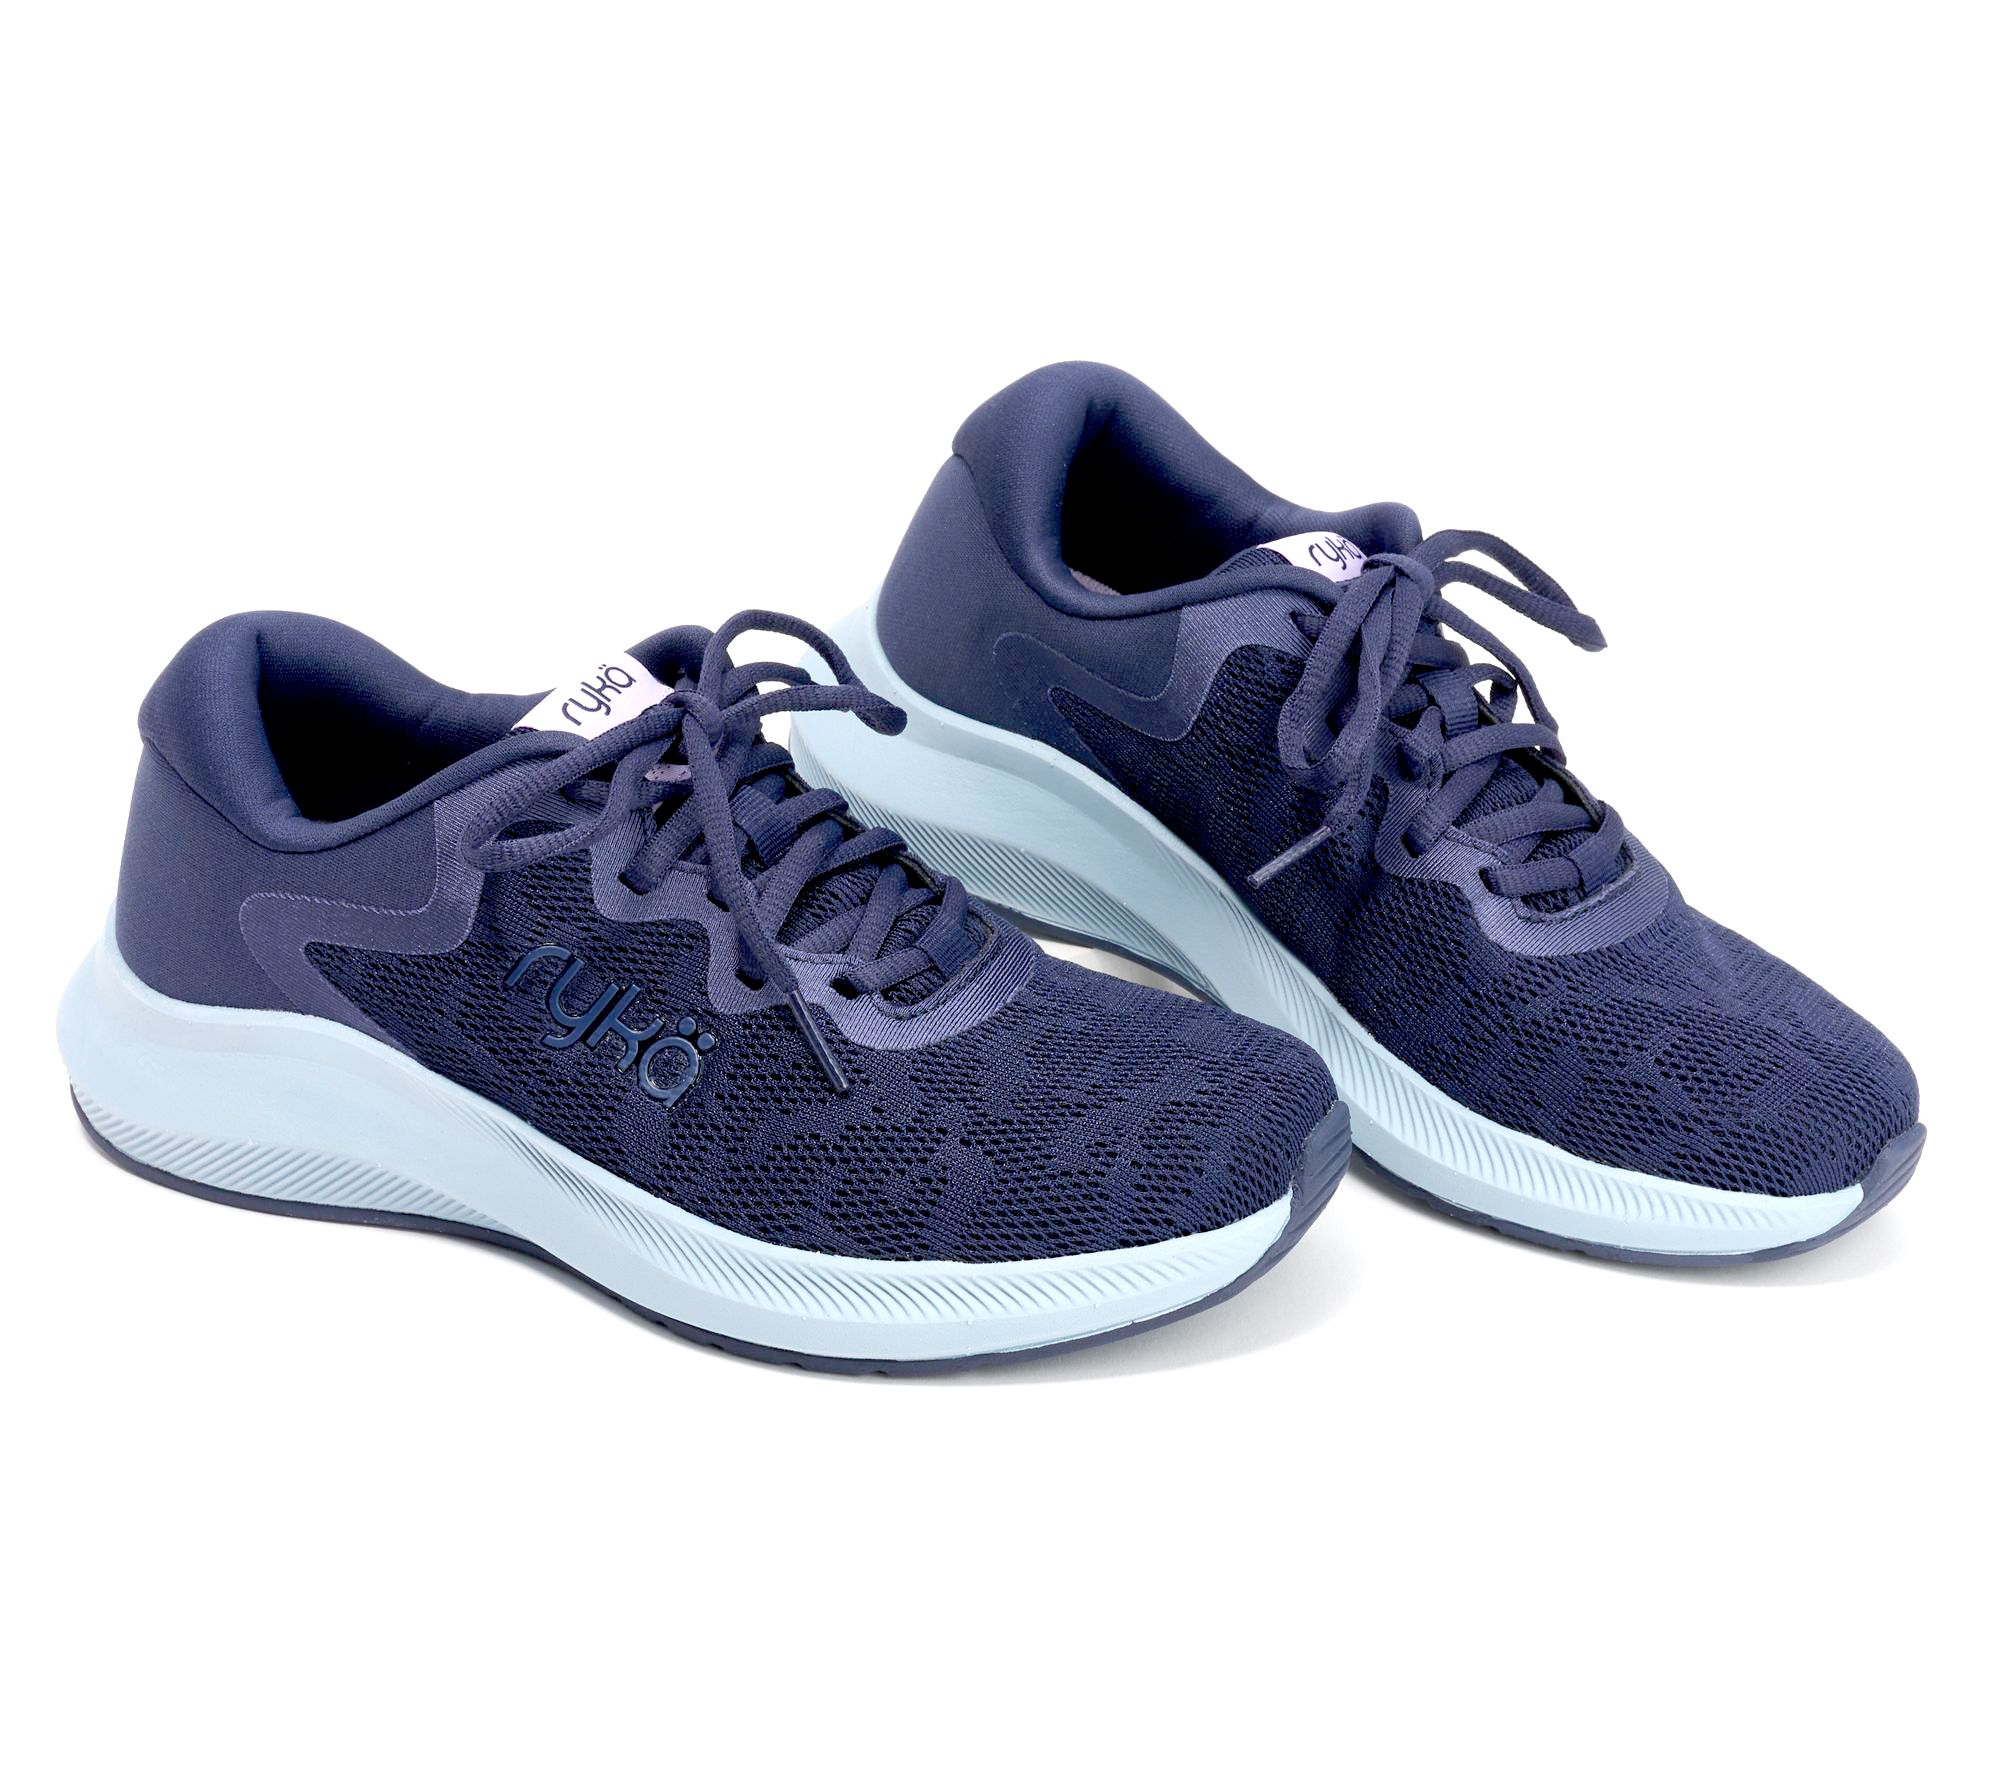  Athletic - Shoes: Clothing, Shoes & Accessories: Running, Team  Sports, Walking, Skateboarding, Cycling & More